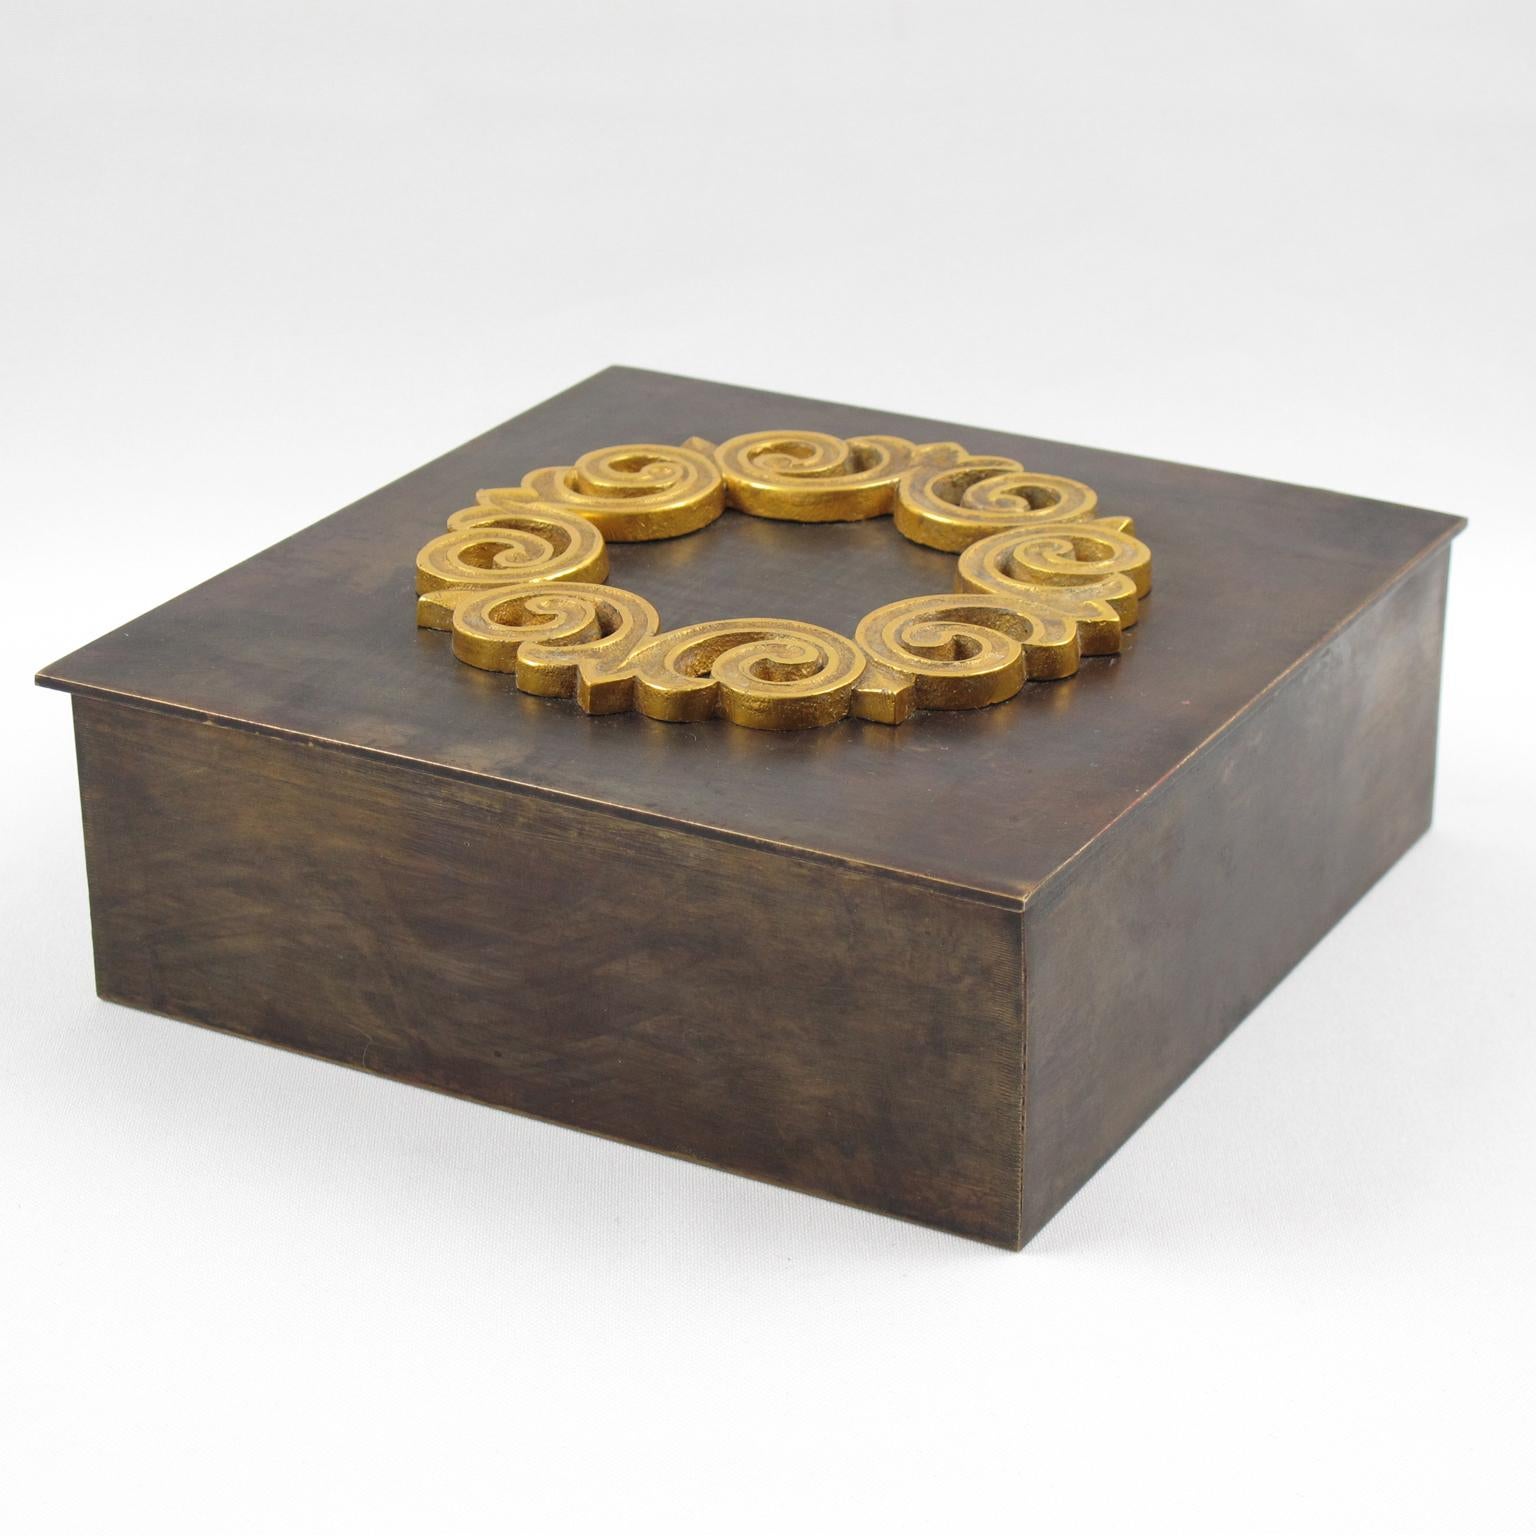 This stunning decorative box was crafted in France in the 1940s. The geometric square shape has a modernist minimalist design with industrial flair. The quality brass metal has an industrial-like dark brown original patina. The piece boasts a